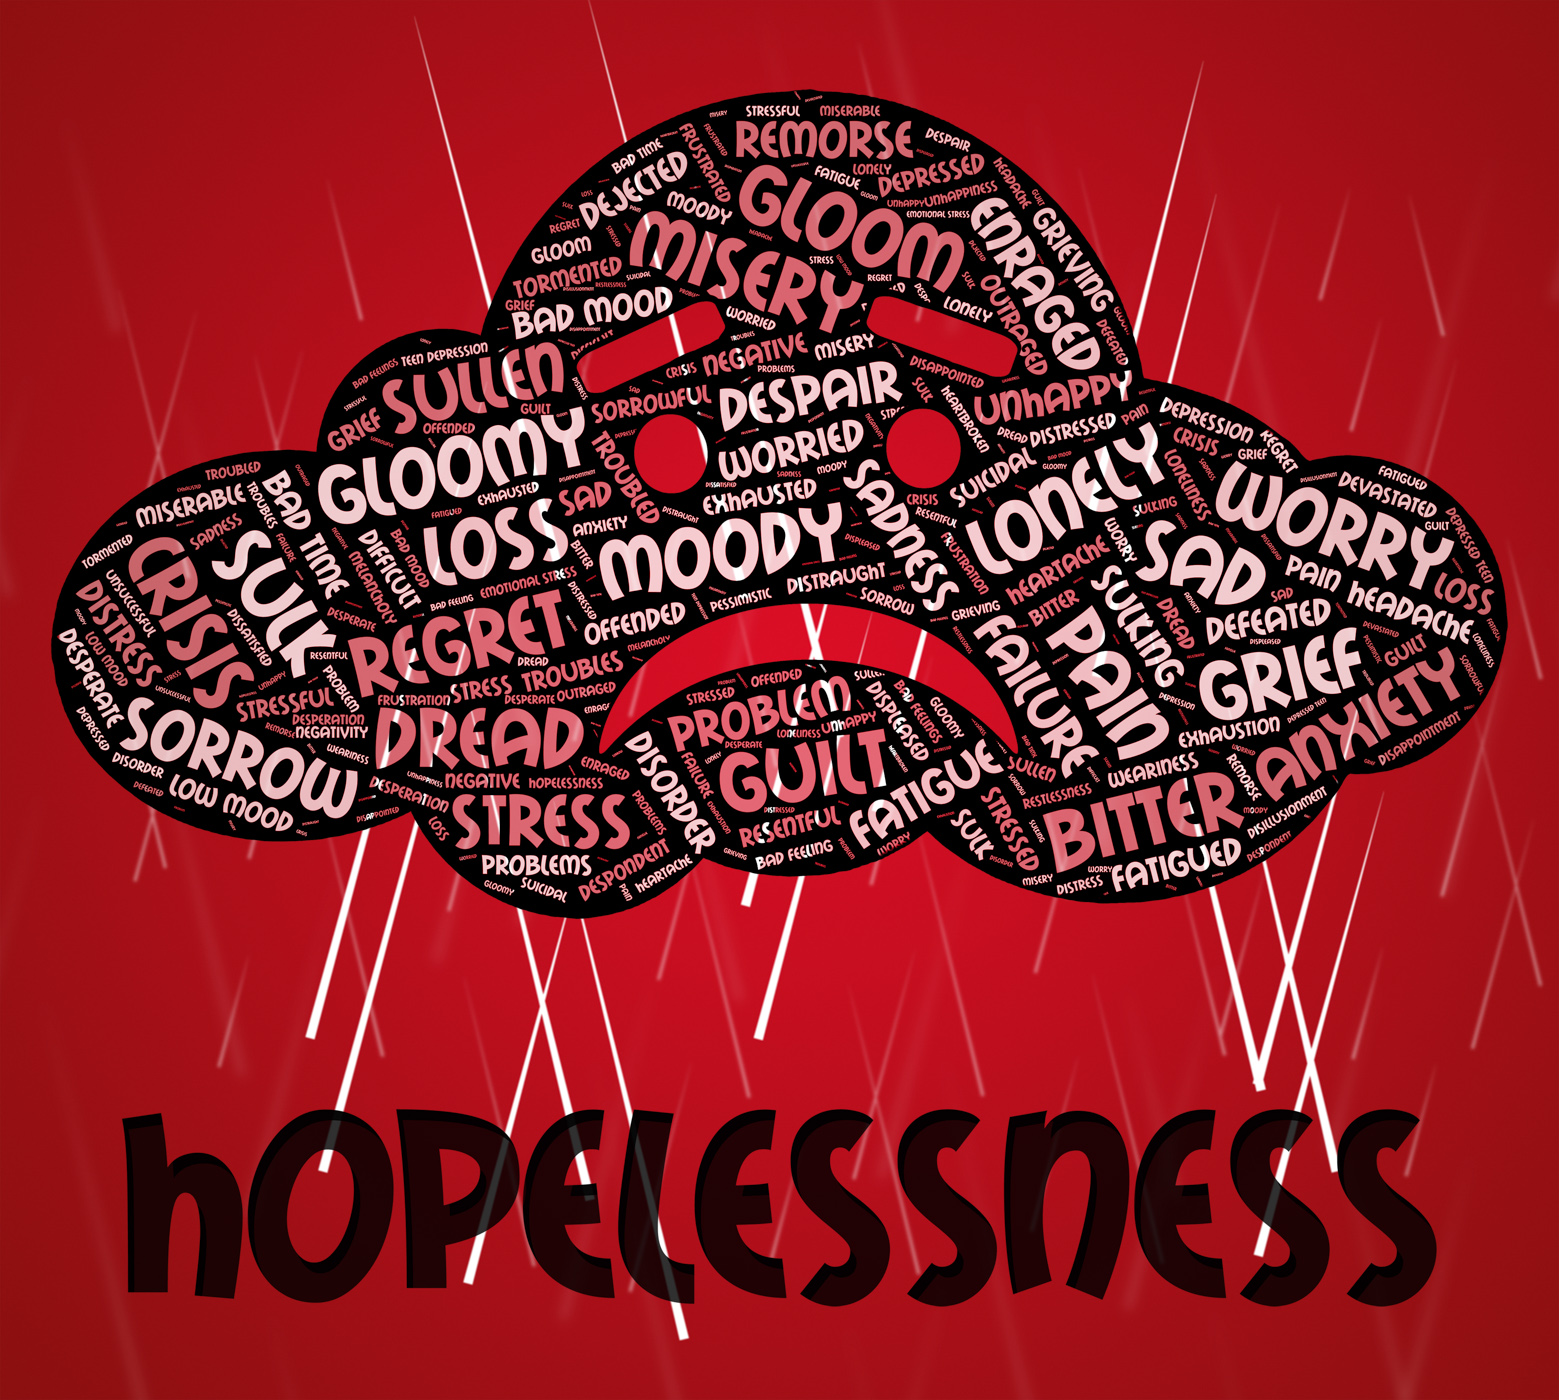 Hopelessness word shows in despair and defeatist photo